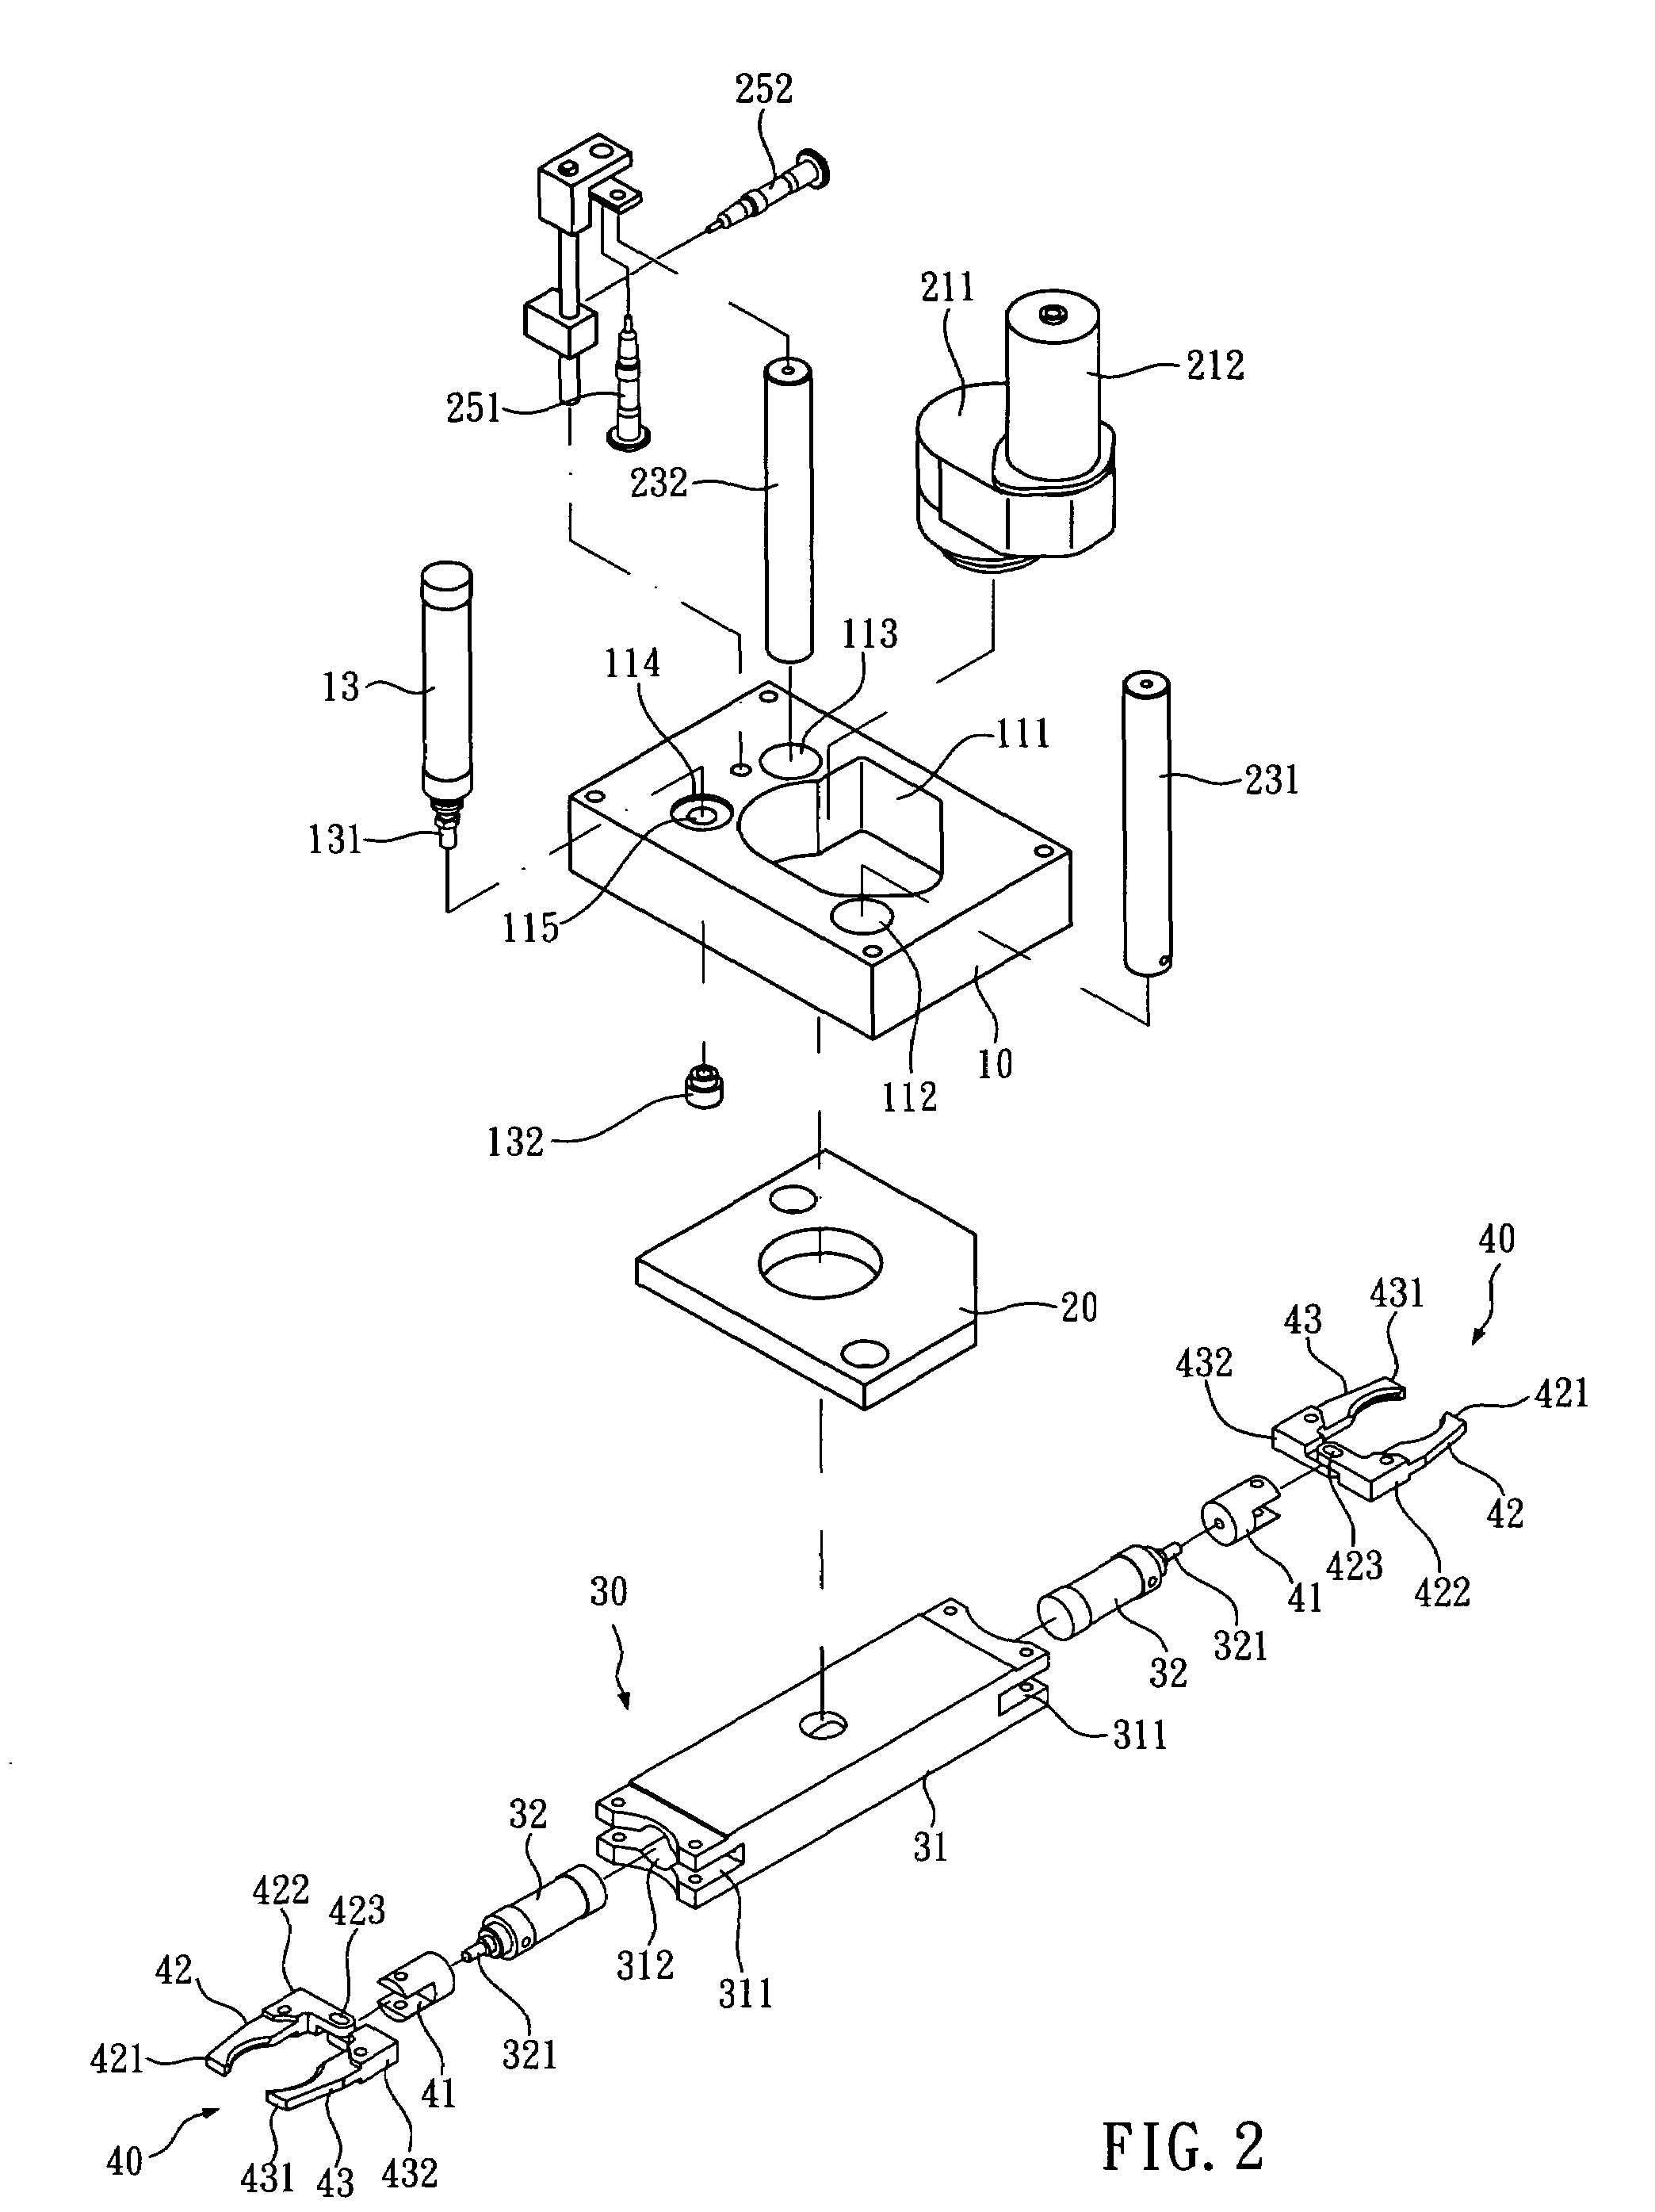 Automatic tool-changing arm of automatic tool changer